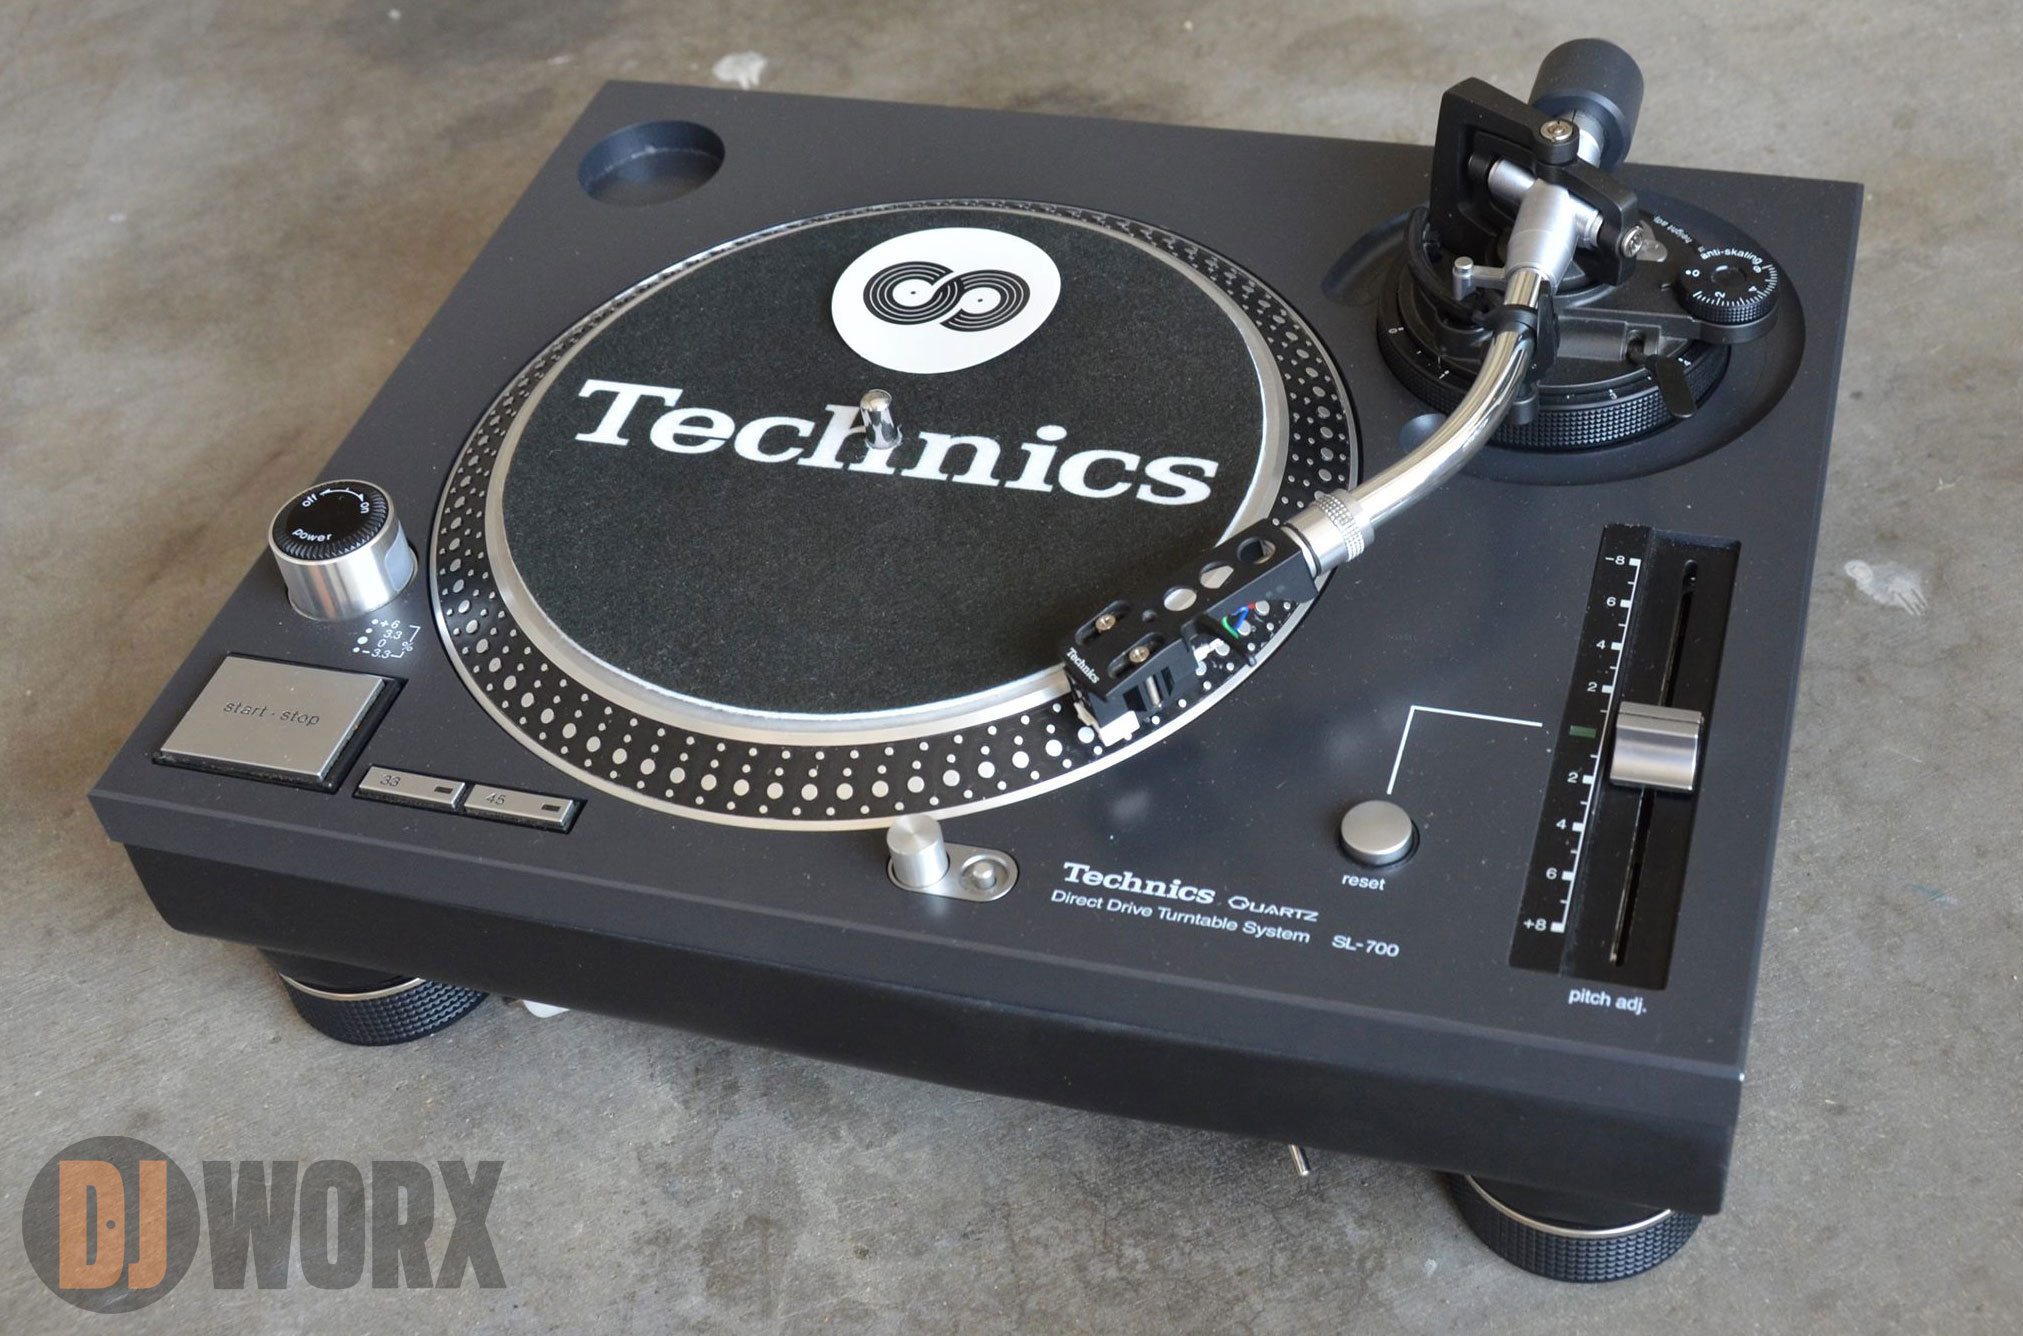 SPOTTED: 7 Technics SL-700 turntable in the wild! – DJWORX